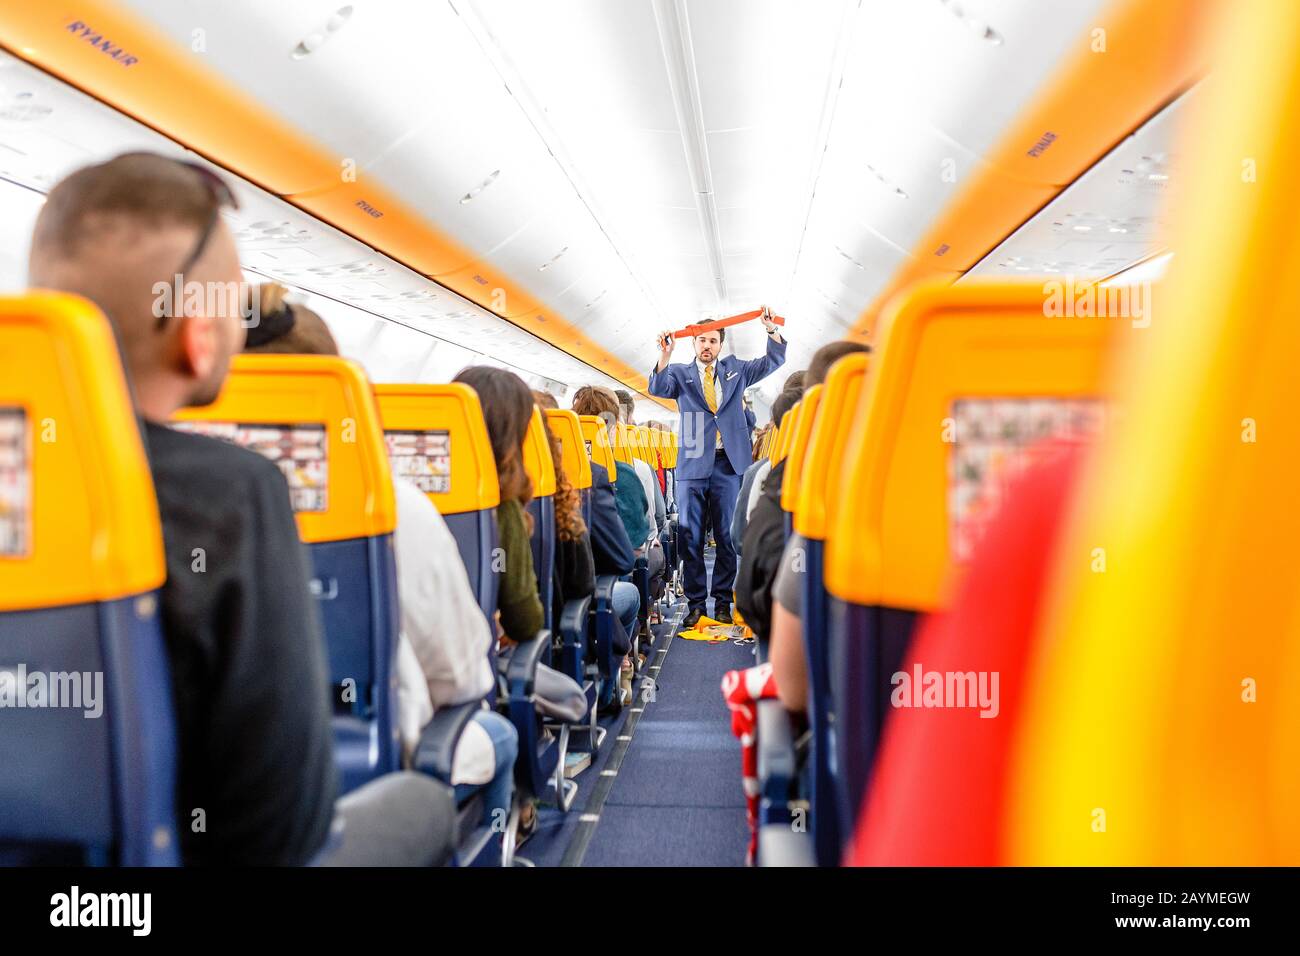 16 MAY 2018, BUDAPEST HUNGARY: Passengers seating and listening to the crew members steward safety instructions inside the Ryanair airlines plane Stock Photo